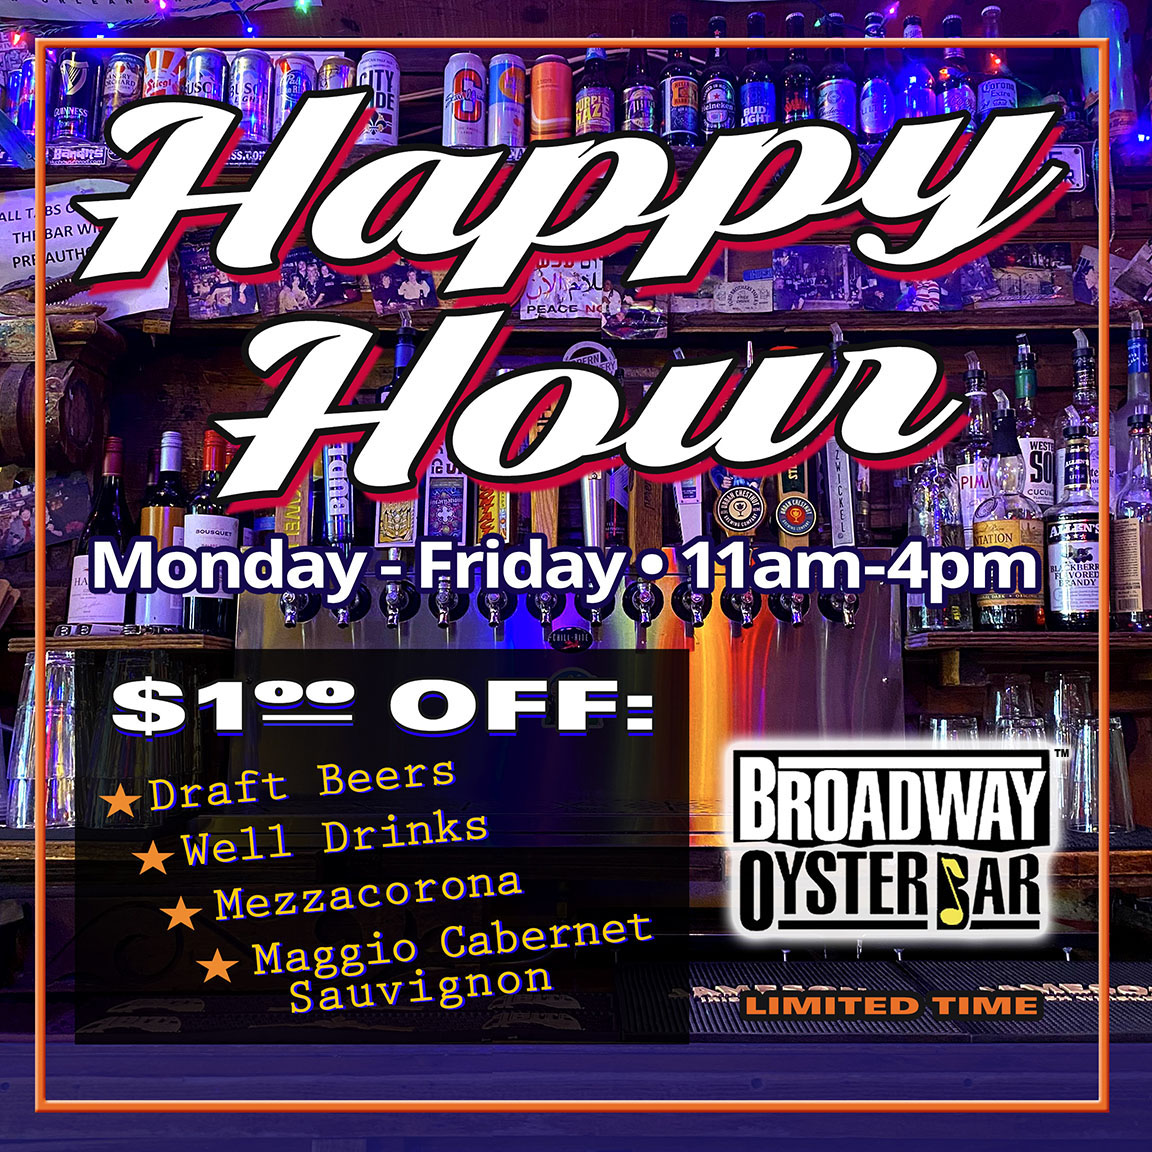 broadway-oyster-bar- Happy Hour 11 am - 4 pm